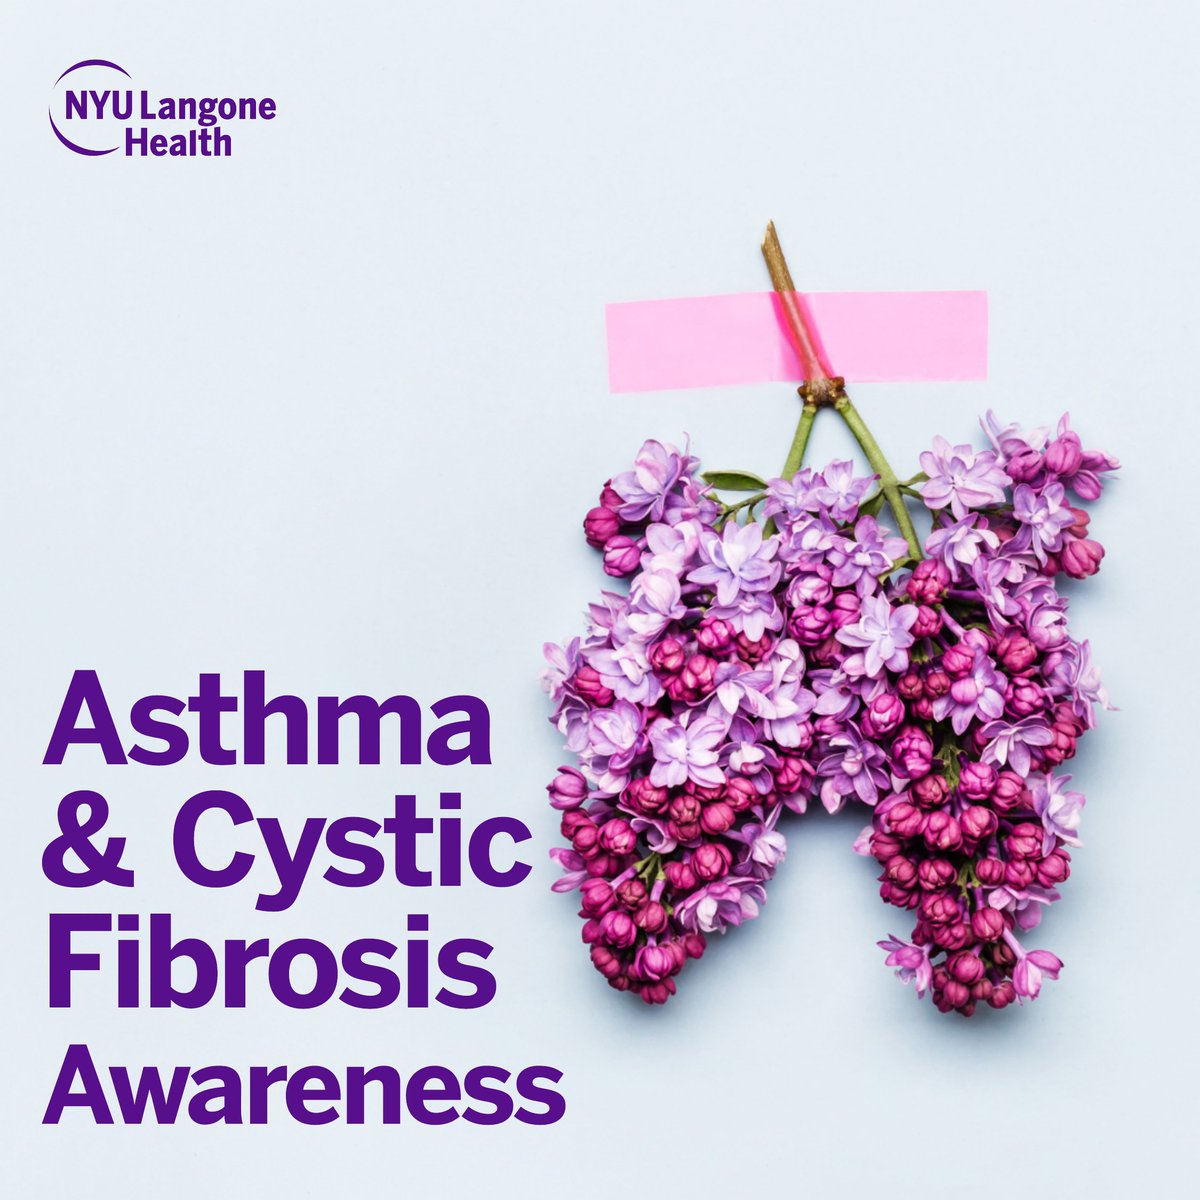 This month we join respiratory organizations around the country in raising awareness for the prevention and treatment of both #Asthma and #cysticfibrosis!

#pulmonary #lungdisease #CFwarrior